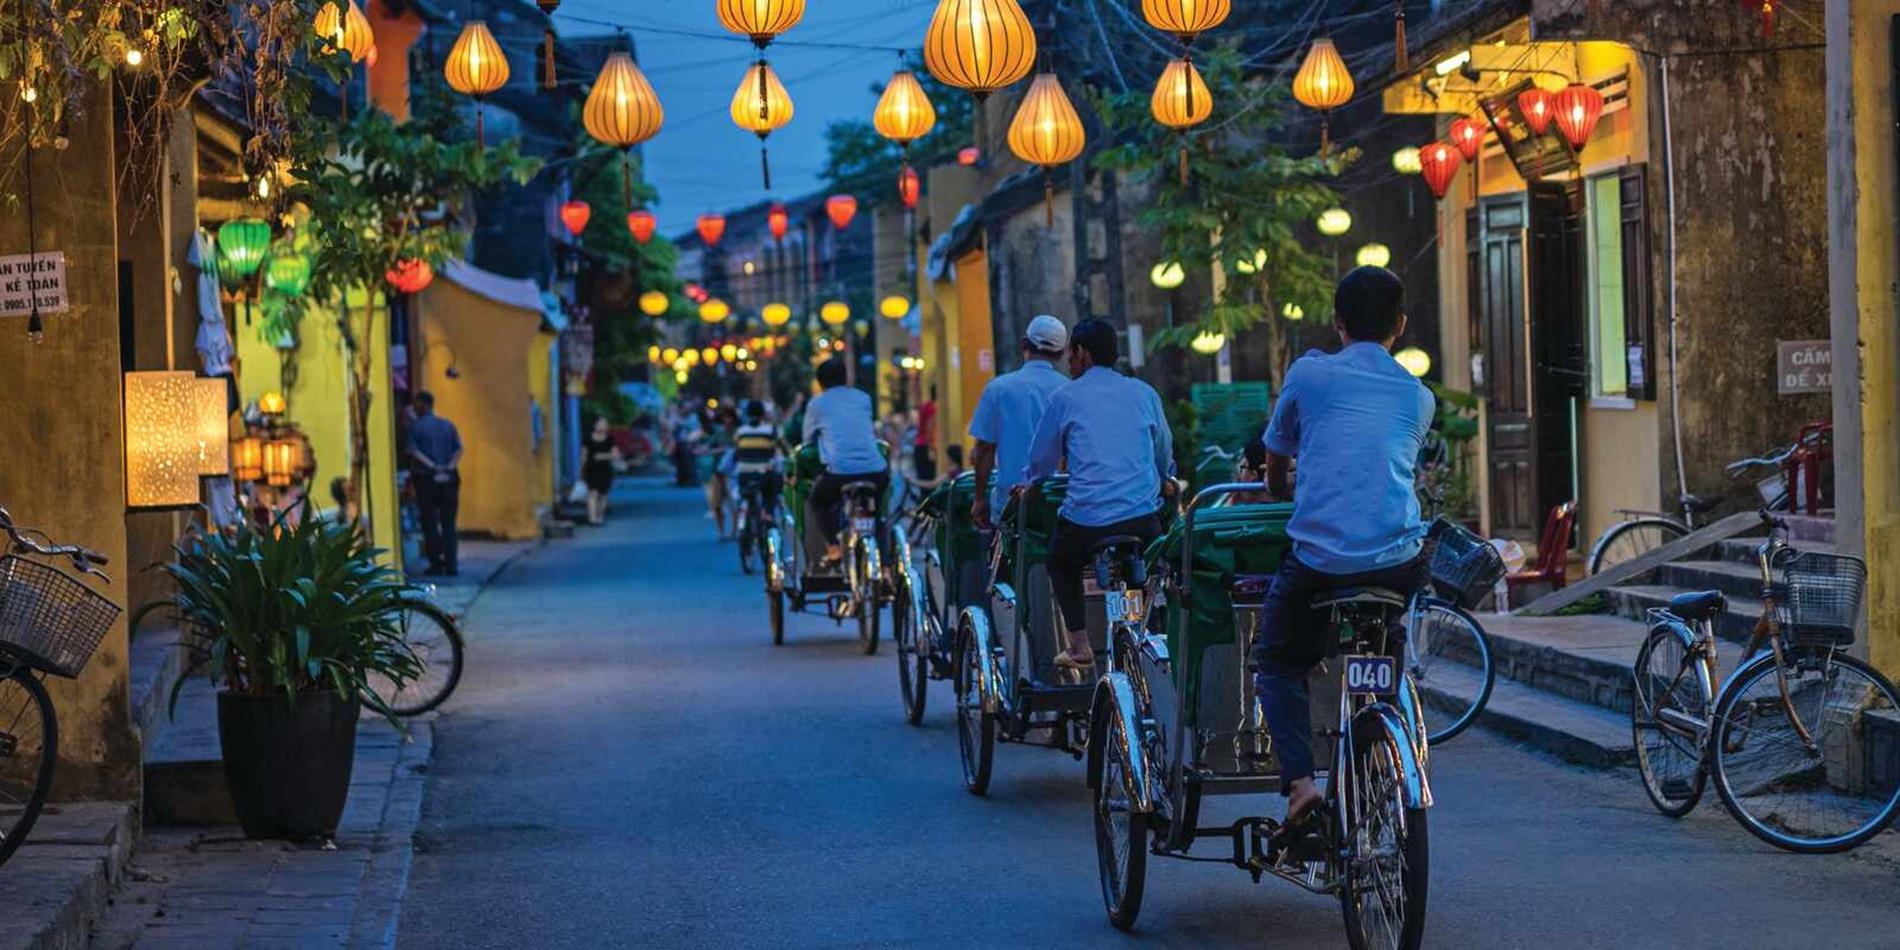 Riding on bikes at night in the streets of Hoi